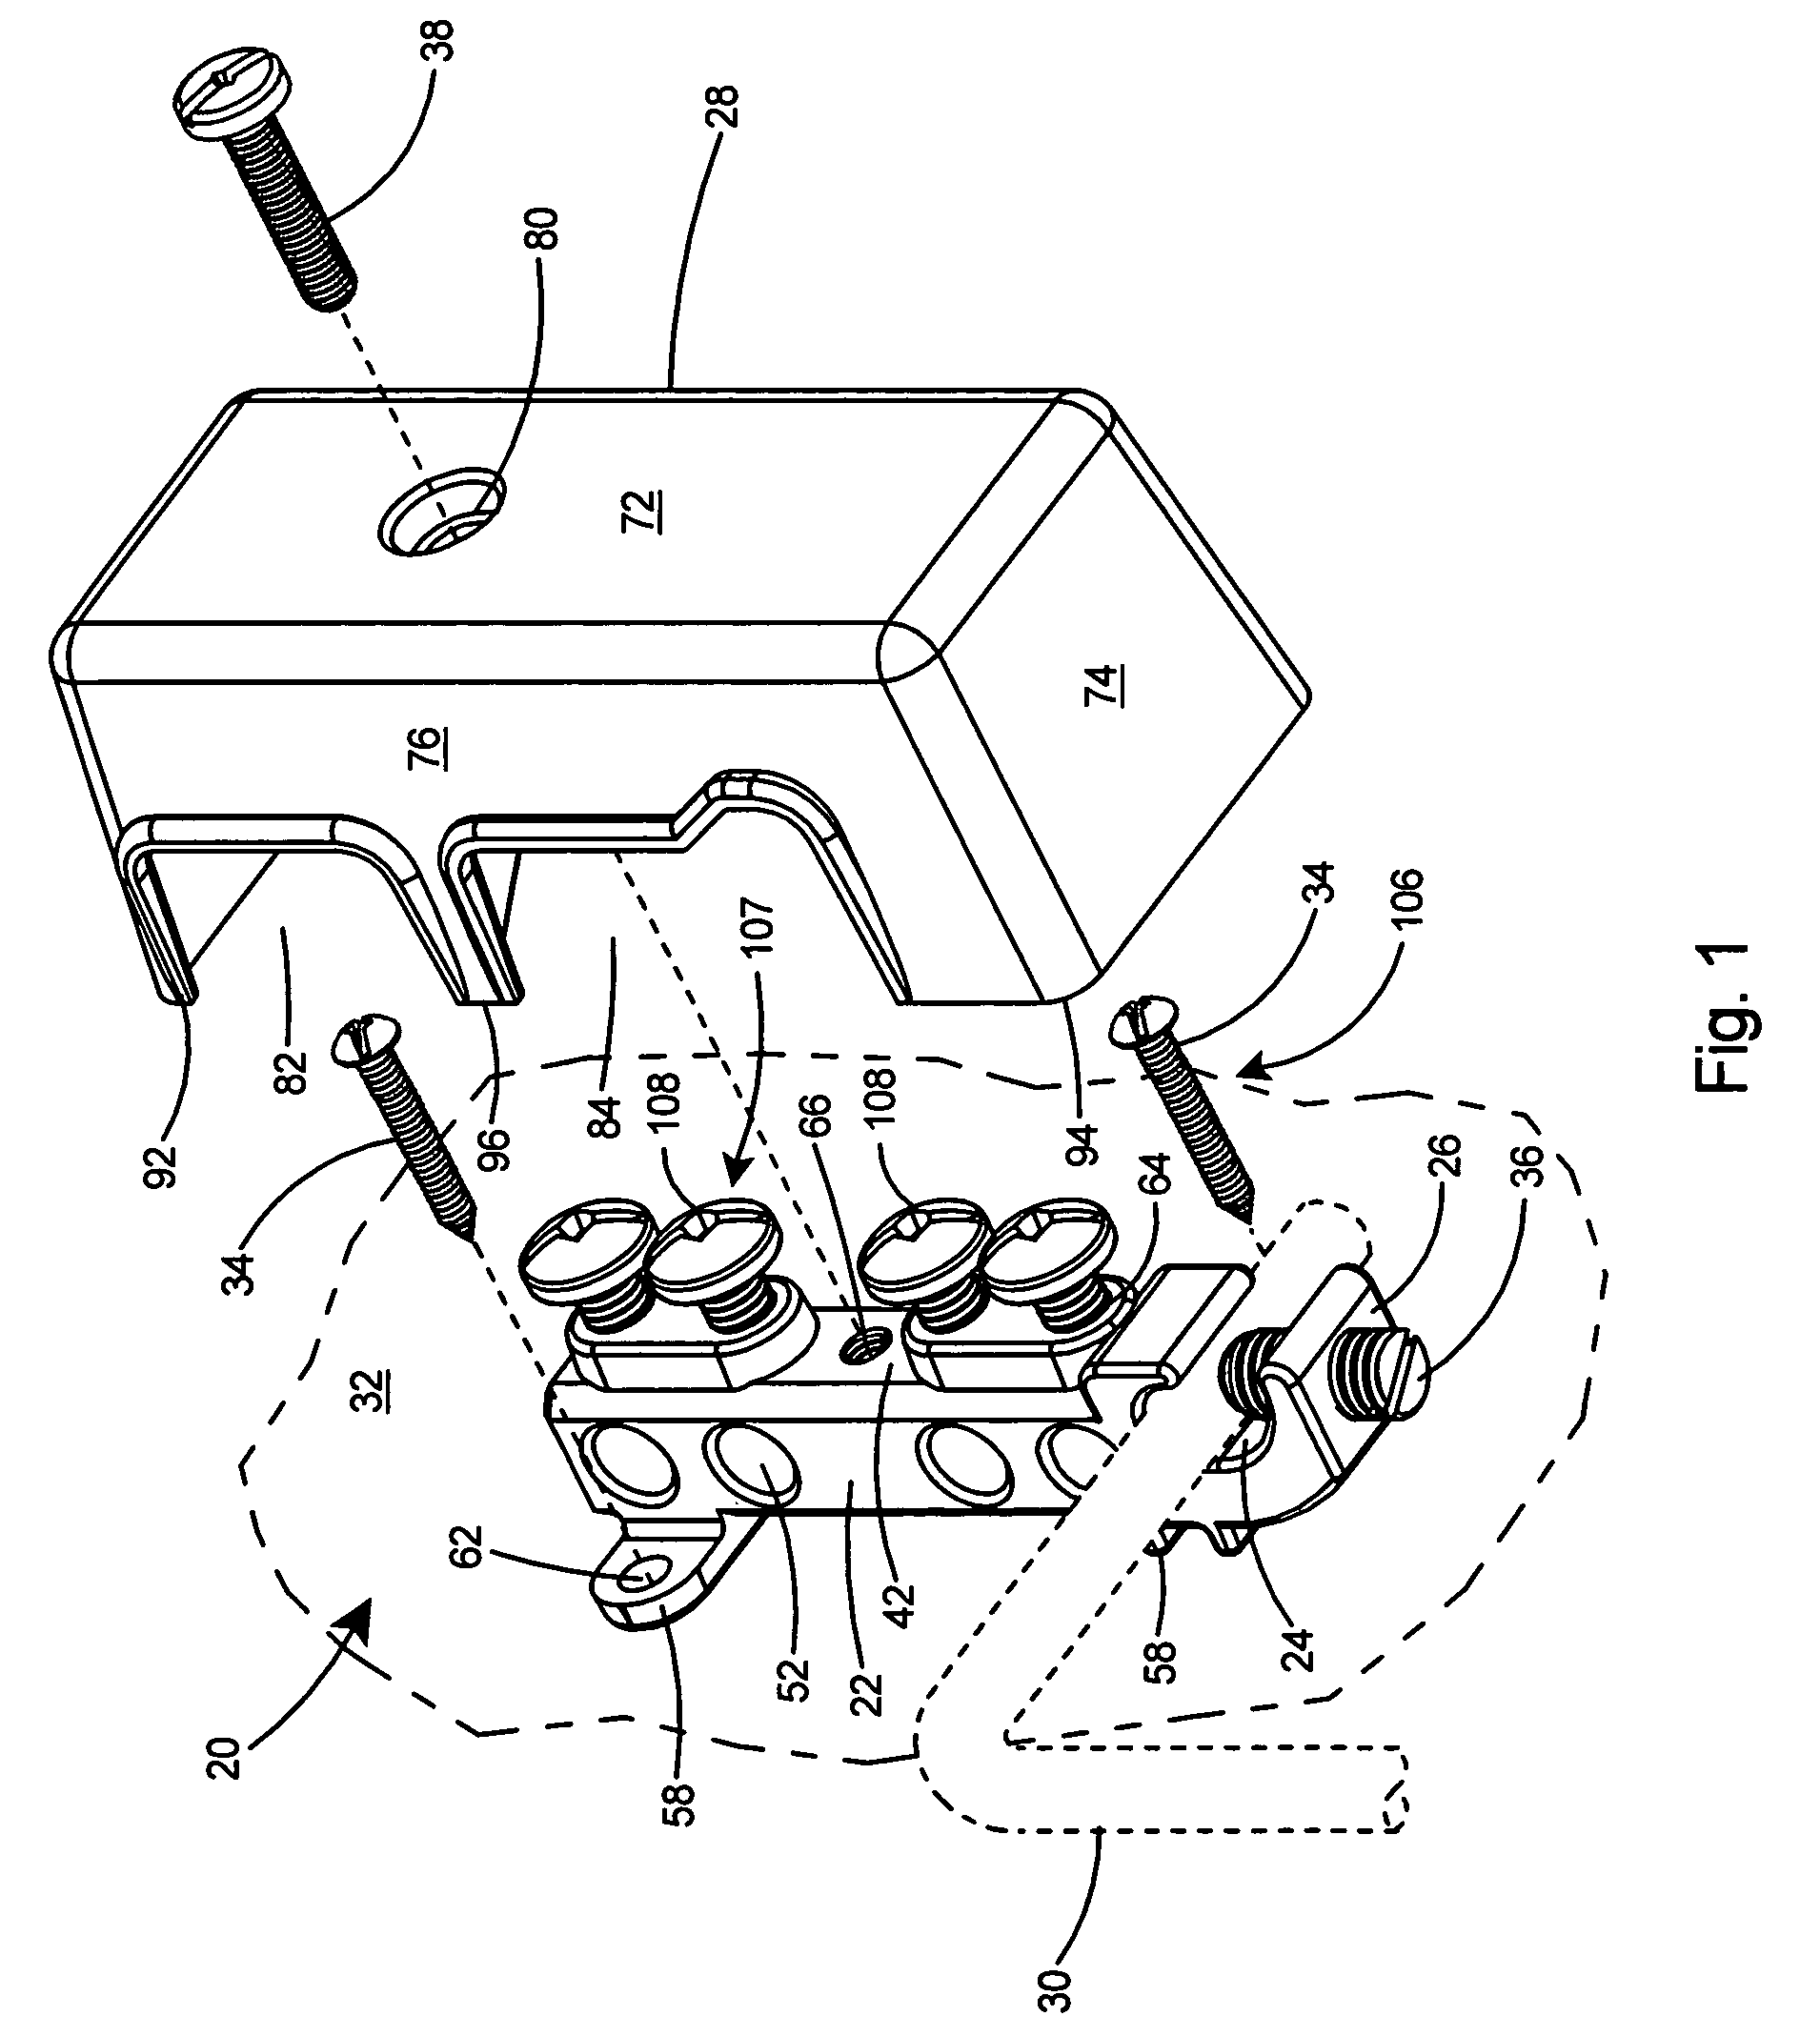 Grounding terminal block assembly including conduit adapter for multiple services